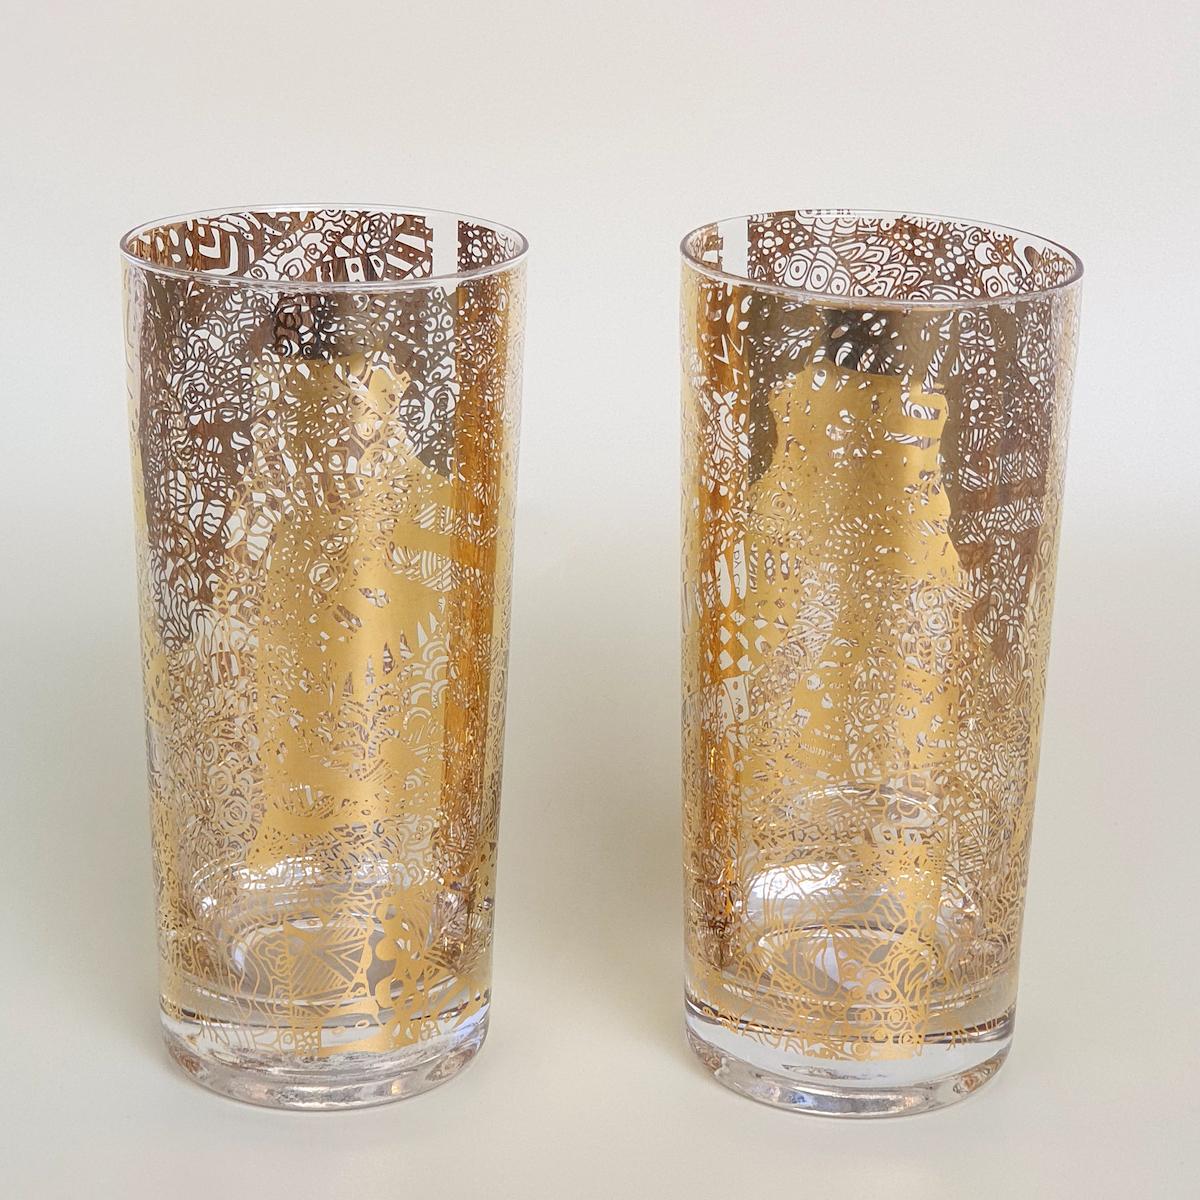 Highball Glass Gold (Set of 2) - Kingfishers at Rest